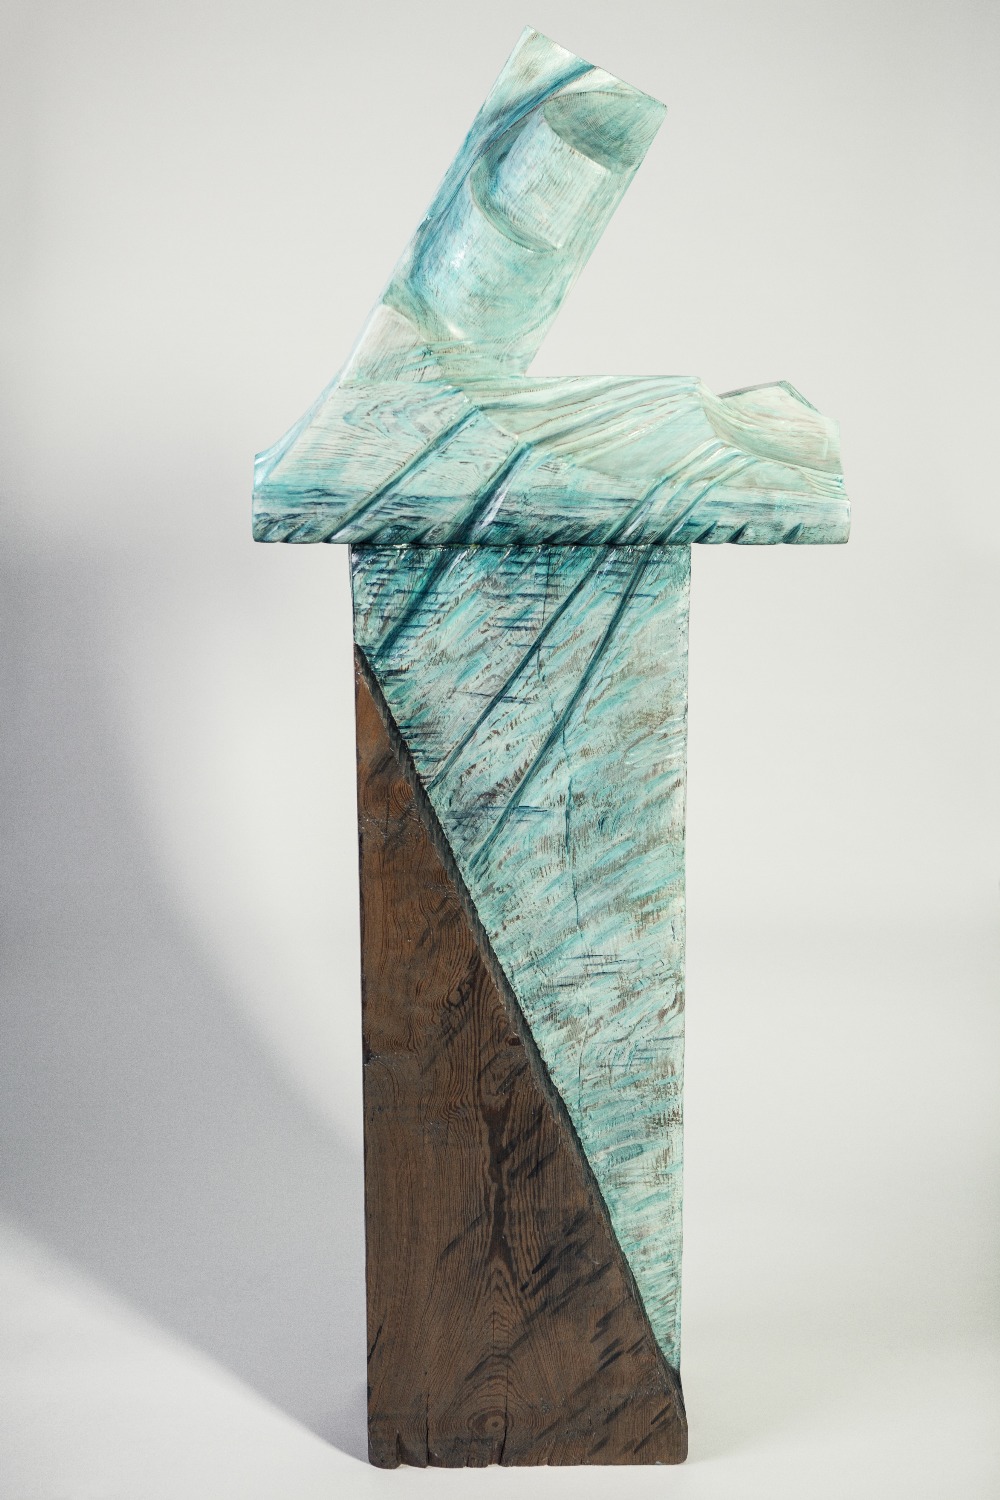 GLENYS LATHAM RECLAIMED PITCH PINE SCULPTURE WITH ACRYLIC PAINT 'Nanortalik Ice Mountain' Signed